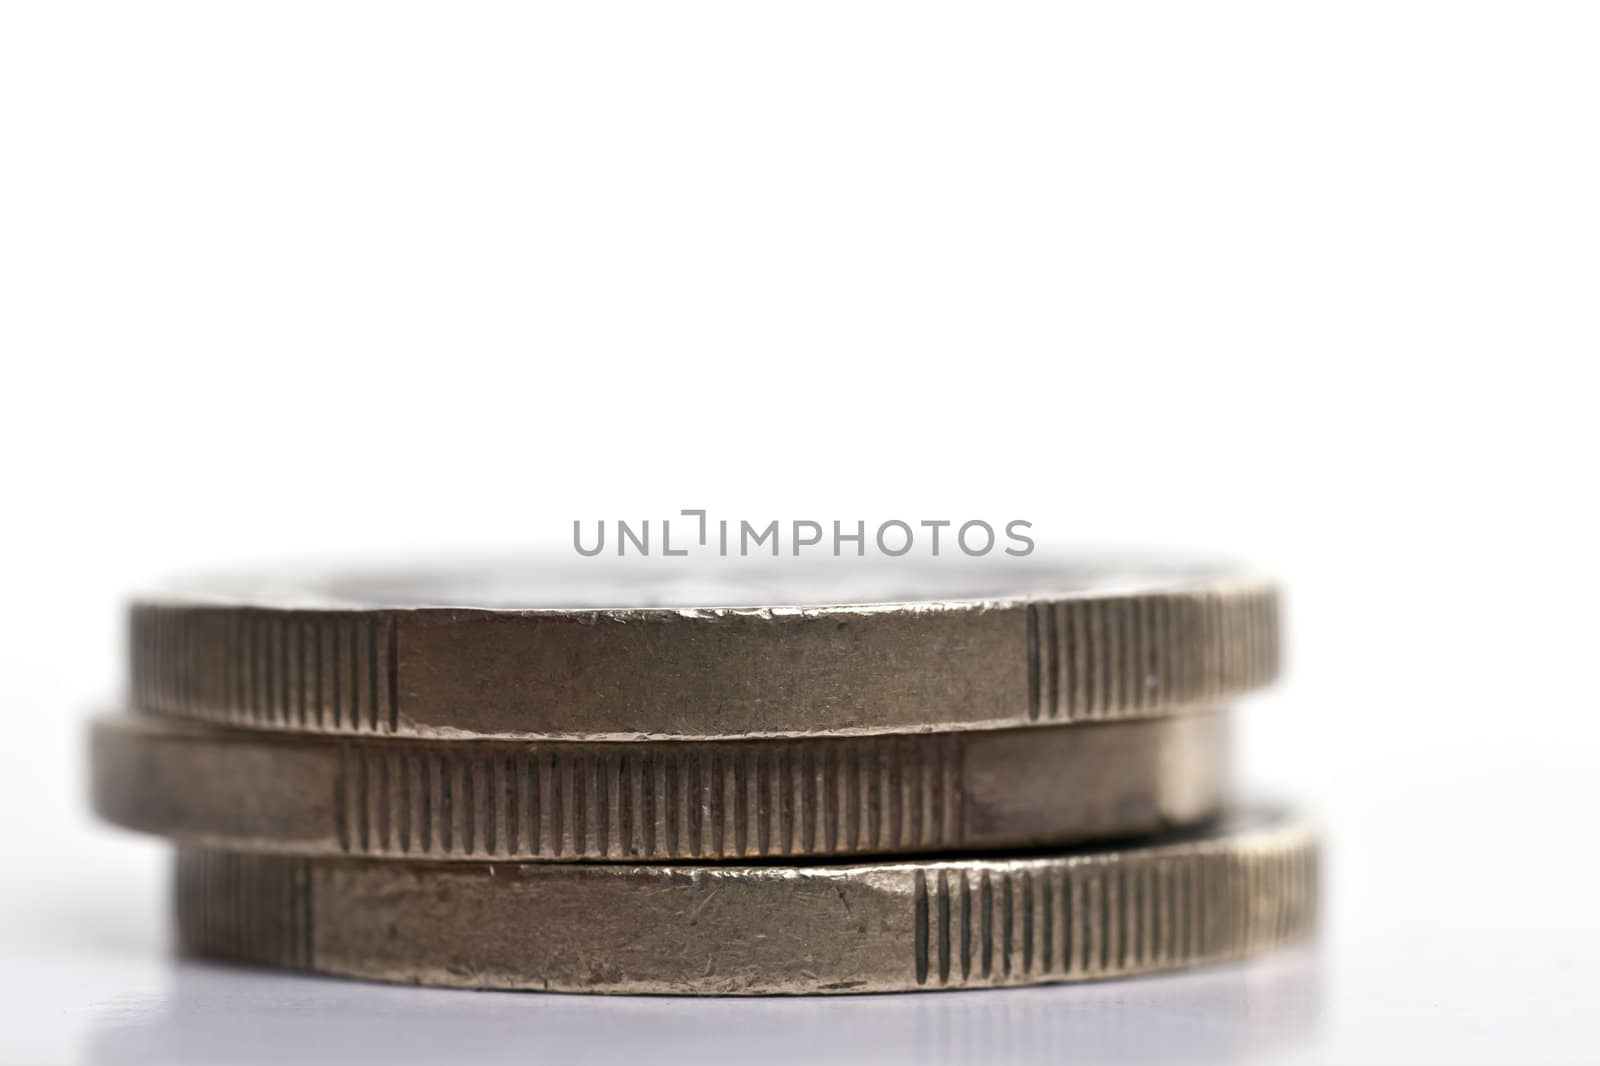 Euro Coin by PhotoWorks